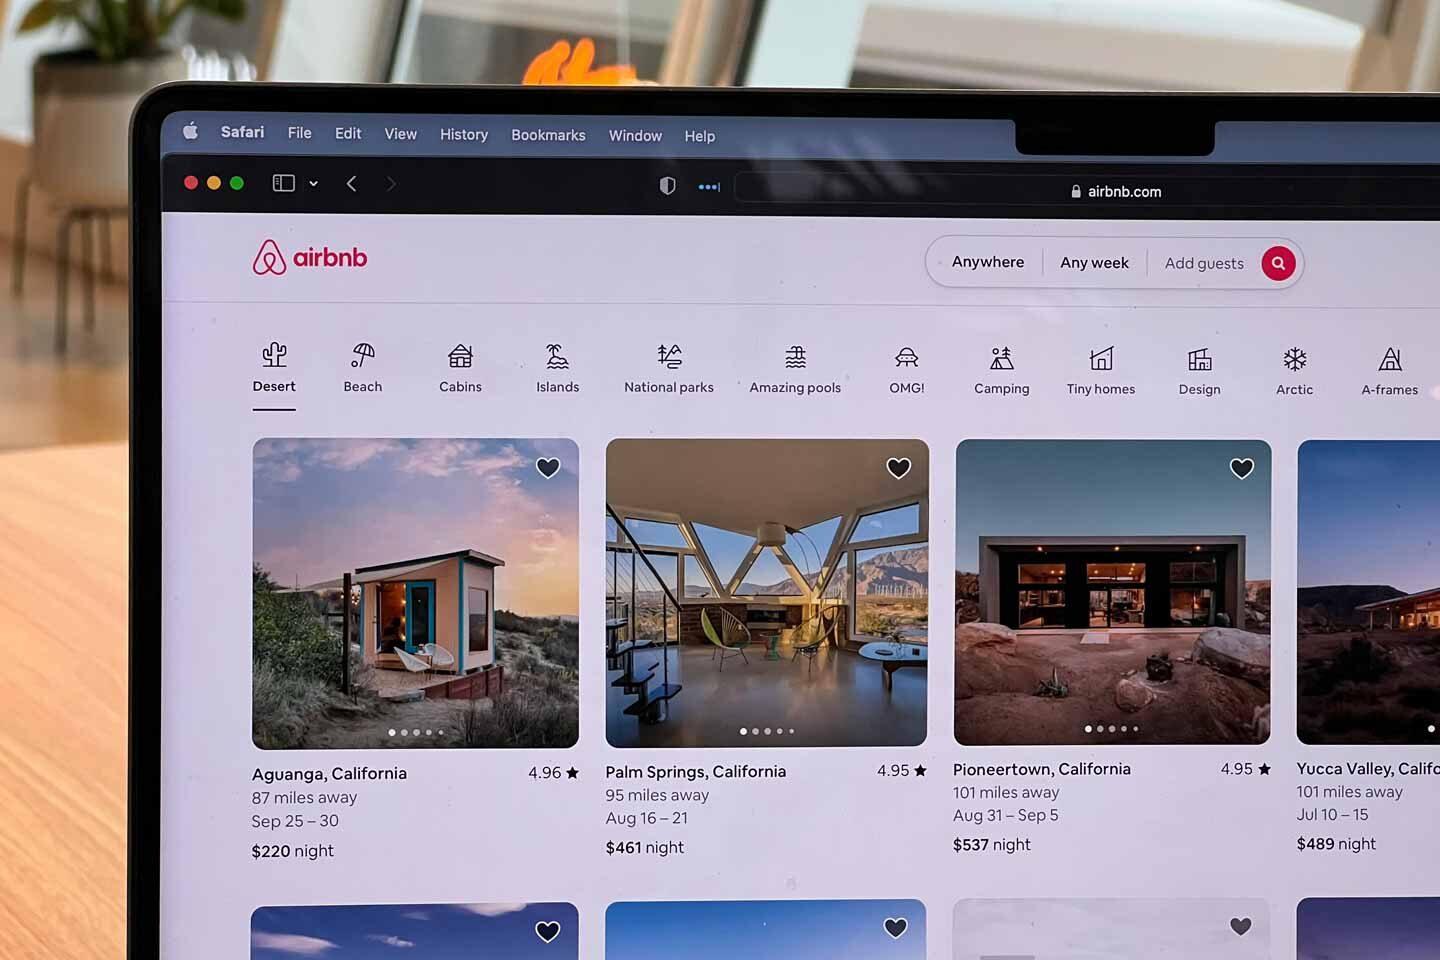 The Airbnb website open on a laptop